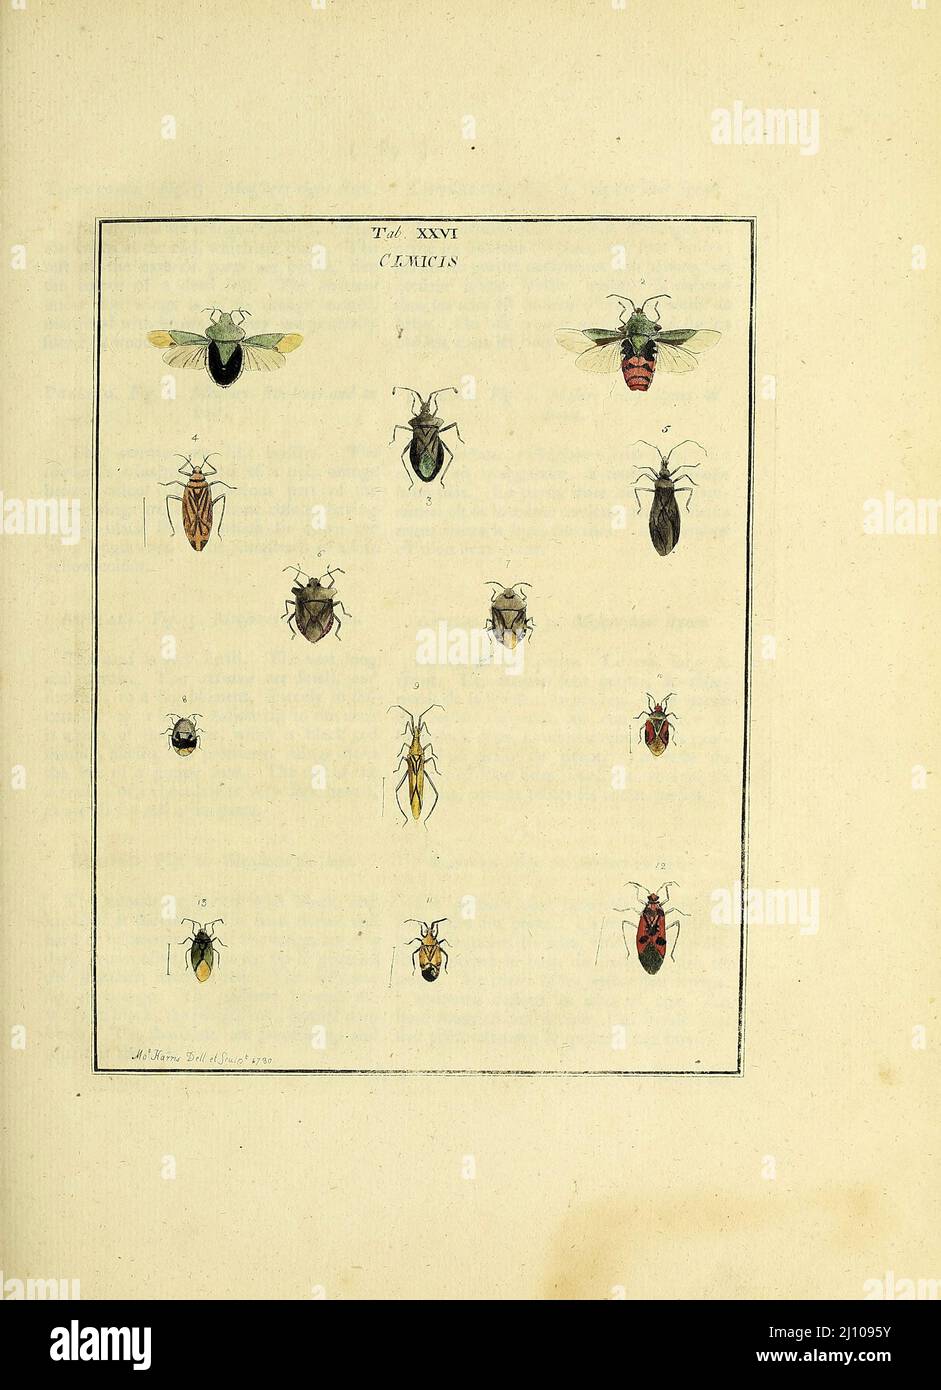 Cimicis from the book An exposition of English insects : including the several classes of Neuroptera, Hymenoptera, & Diptera, or bees, flies, & Libellulae : exhibiting on 51 copper plates near 500 figures, accurately drawn & highly finished in colours, from nature : the whole minutely described, arranged & named, according to the Linnean system, with remarks : the figures of a great number of moths not in the Aurelian collection : formerly published by the same author and a plate with an explanation of colours, are likewise given in the work by  Moses Harris, 1730 - 1788, author and illustrato Stock Photo